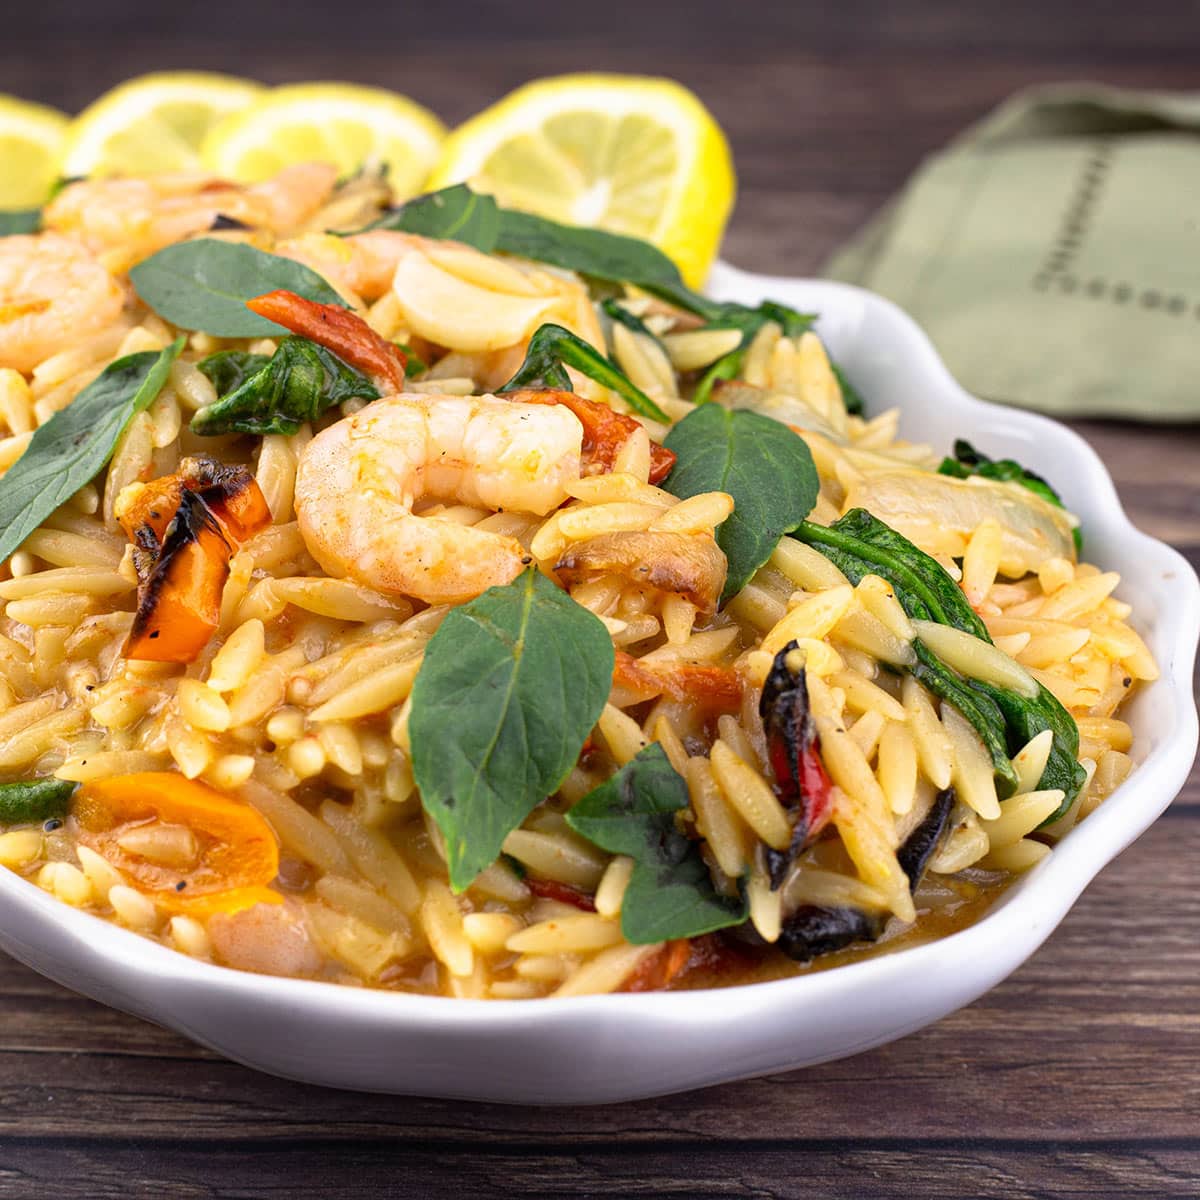 Lemon Orzo Pasta with vegetables and shrimp in a white serving bowl garnished with fresh basil leaves and lemon slices.